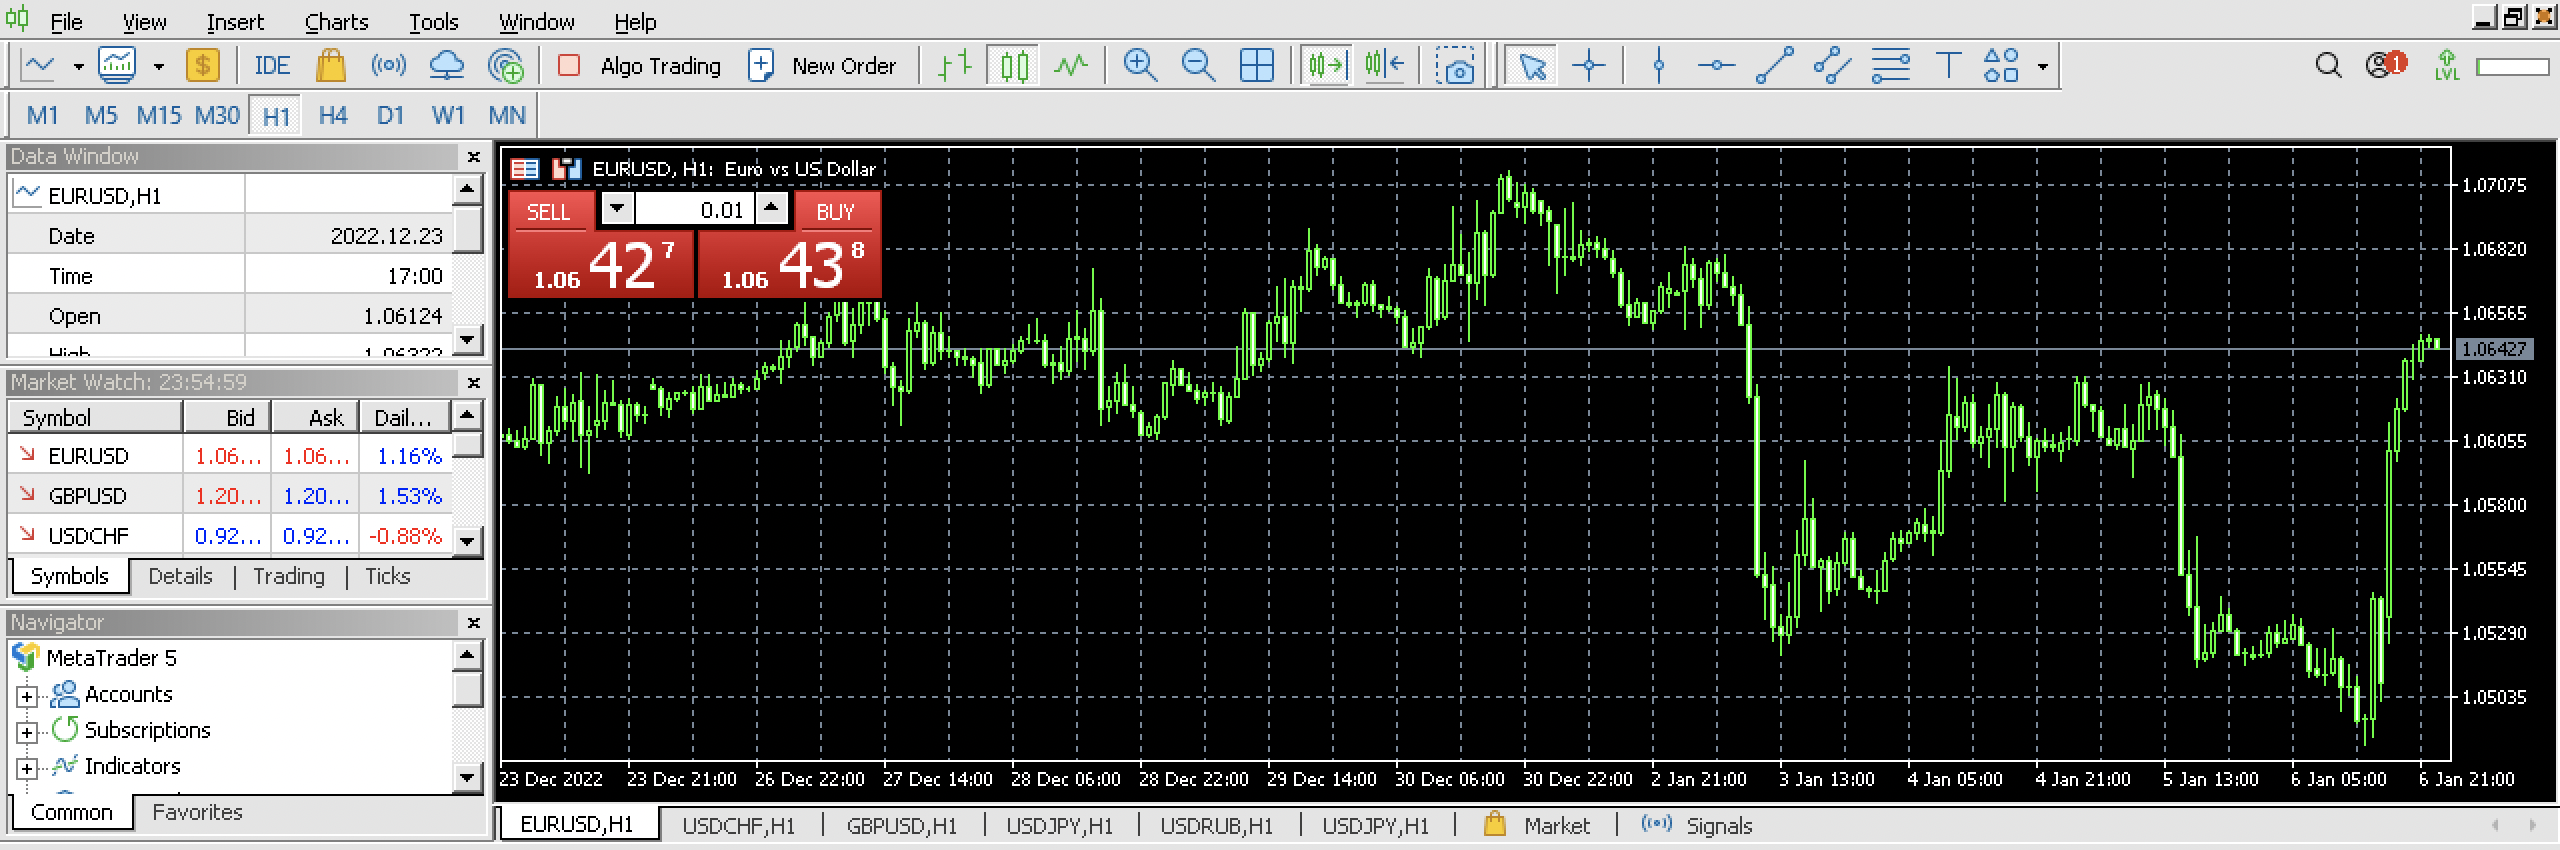 Dashboard of The MetaTrader 5 by Vantage Markets